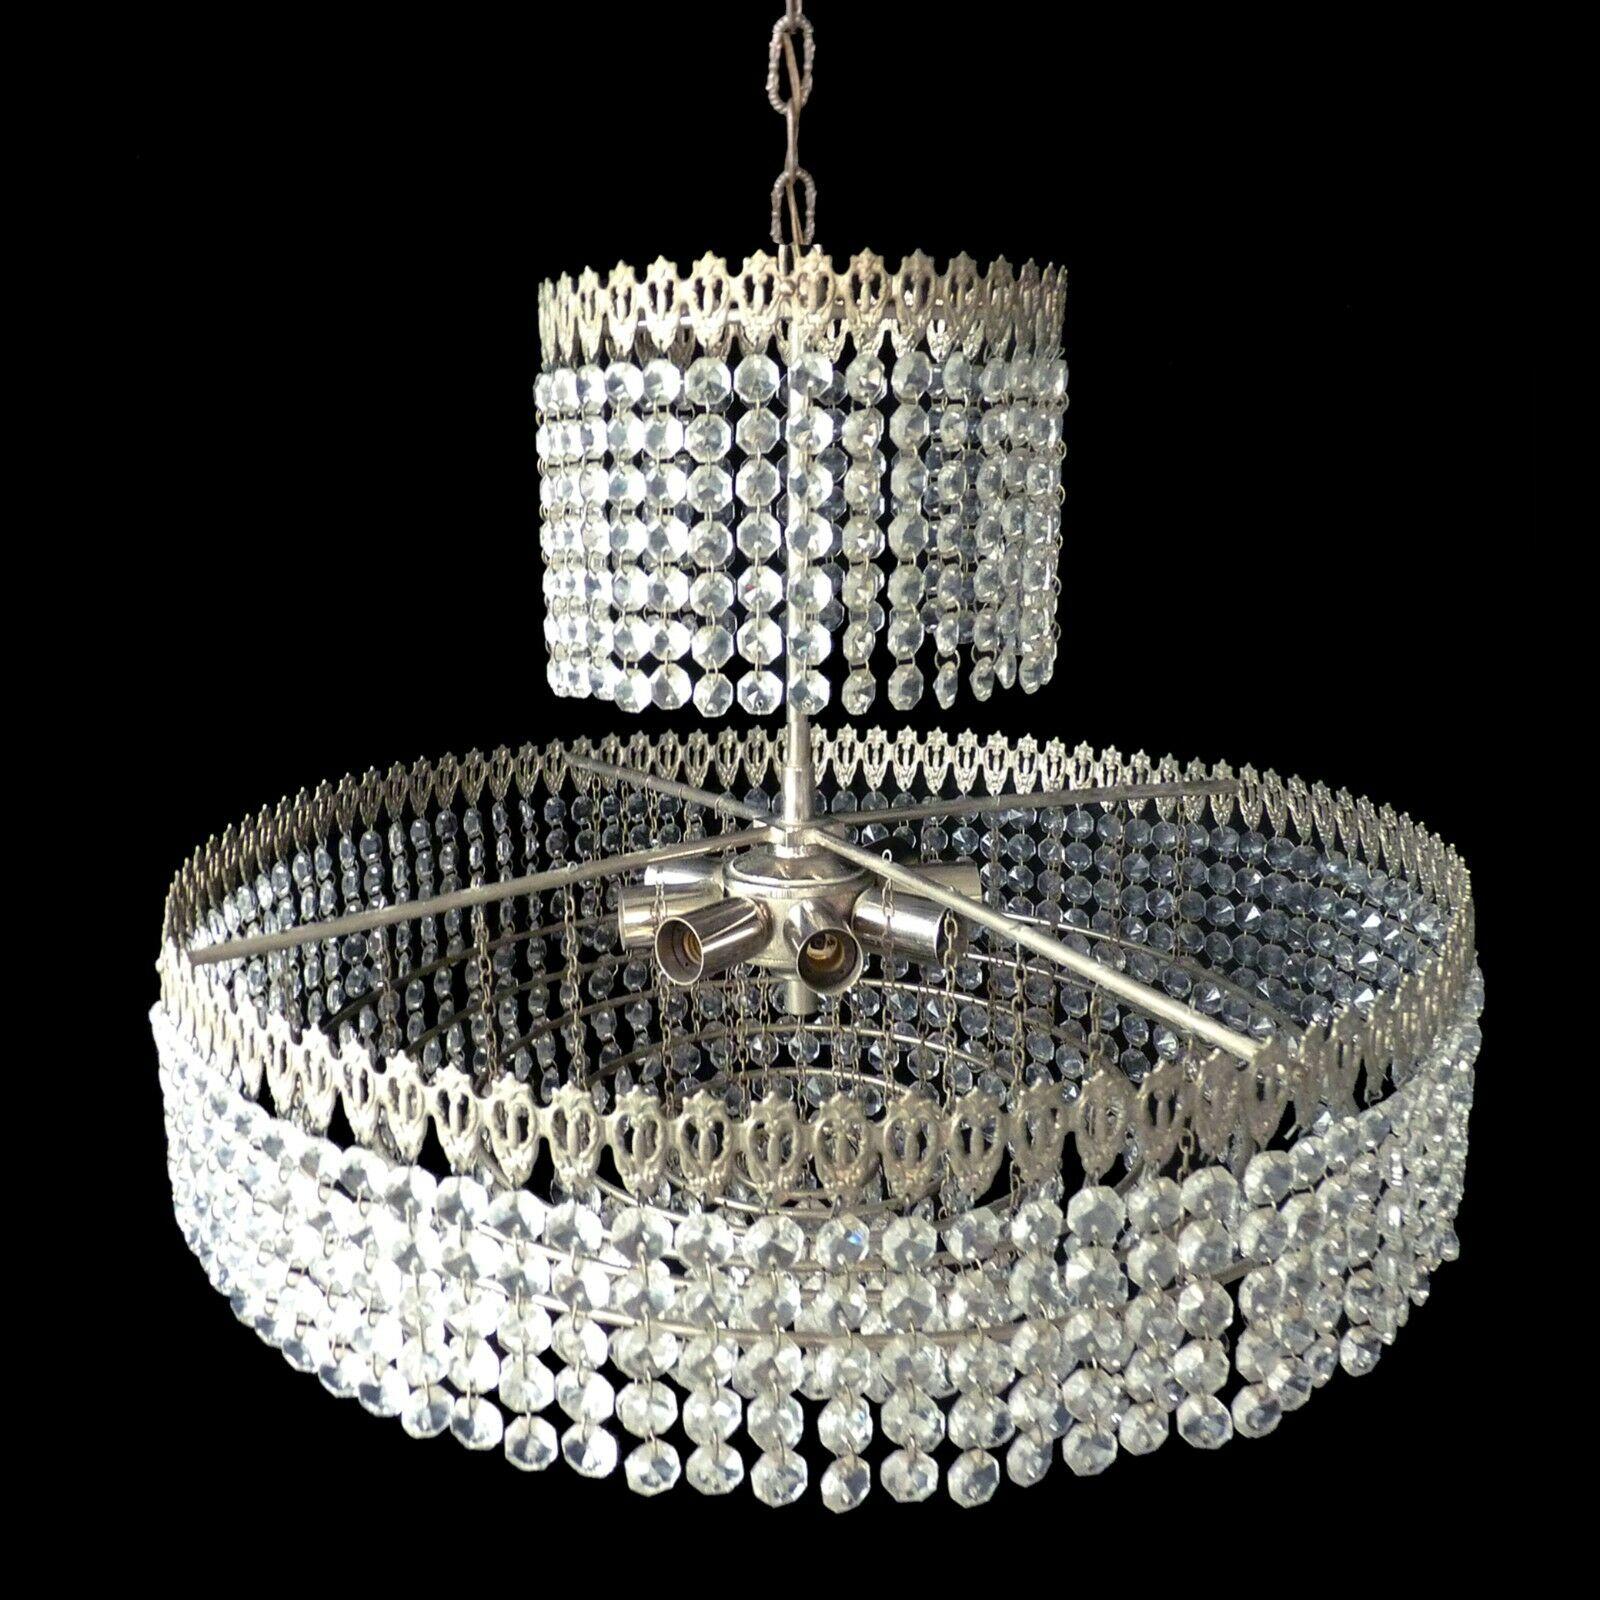 20th Century French Hollywood Regency Chrome Cut Crystal Beads 8tiers Wedding Cake Chandelier For Sale